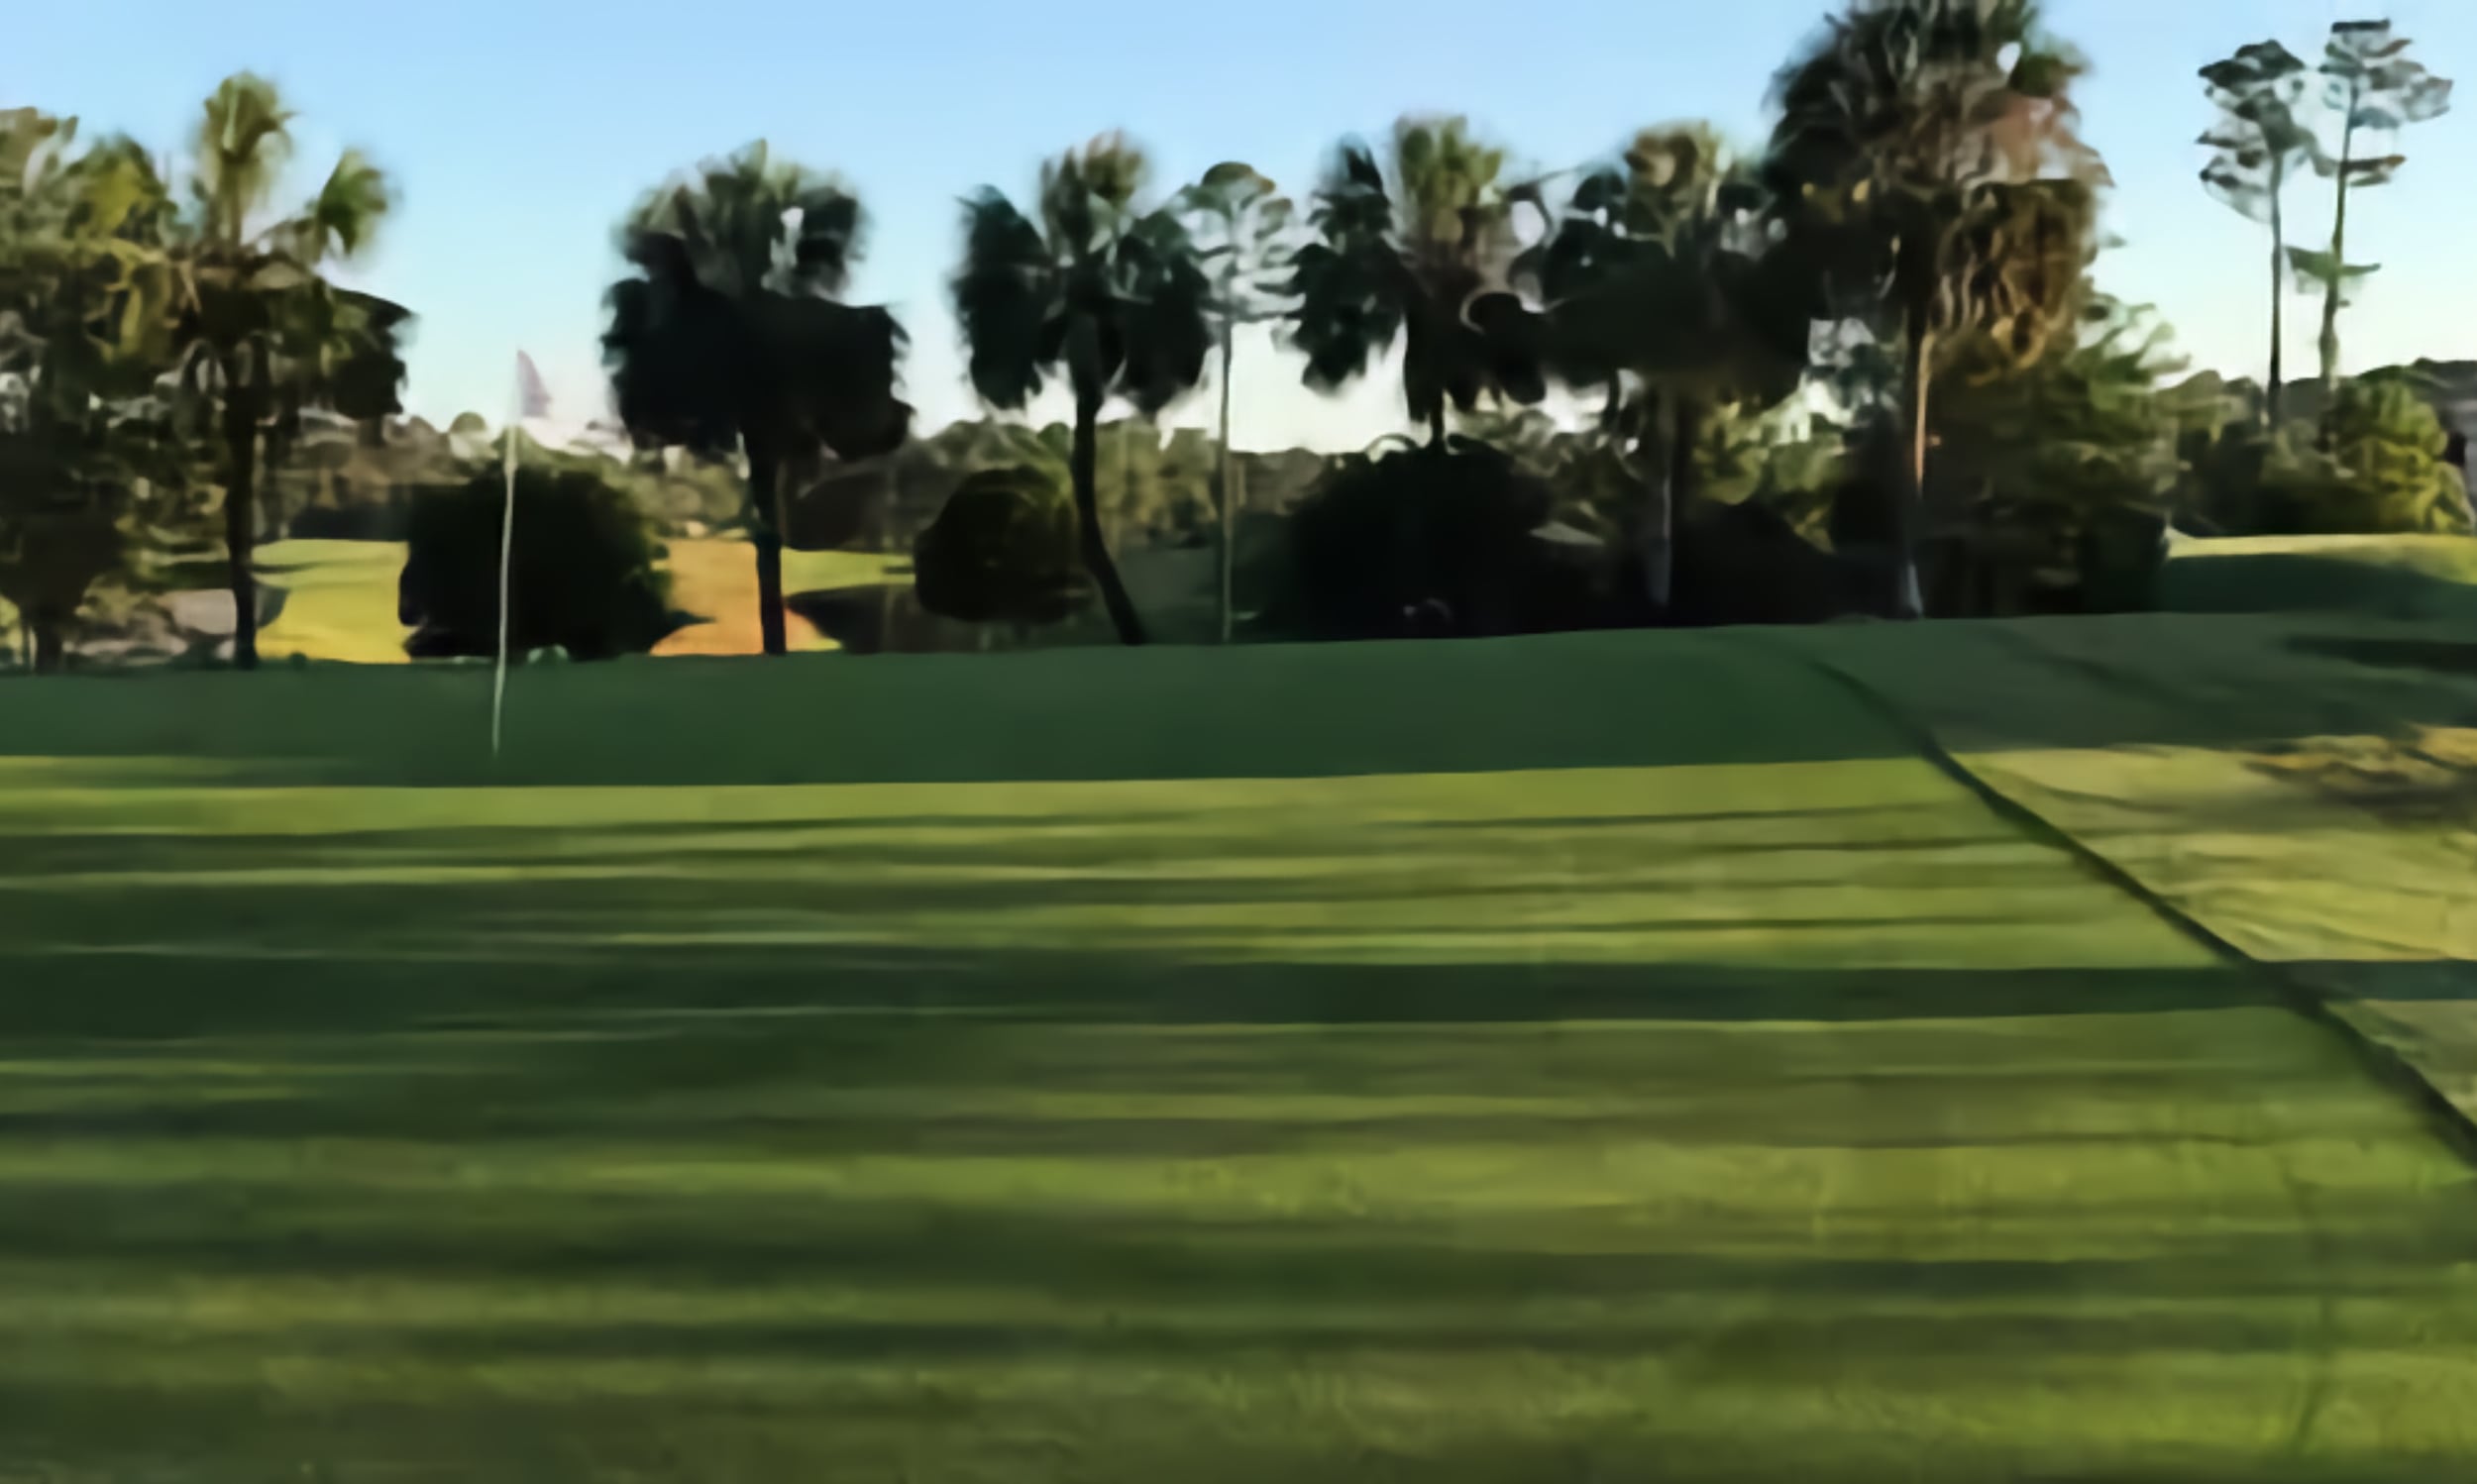 Lush green of Royal St. Augustine with the flagstick in view, surrounded by silhouetted palm trees in the early evening light